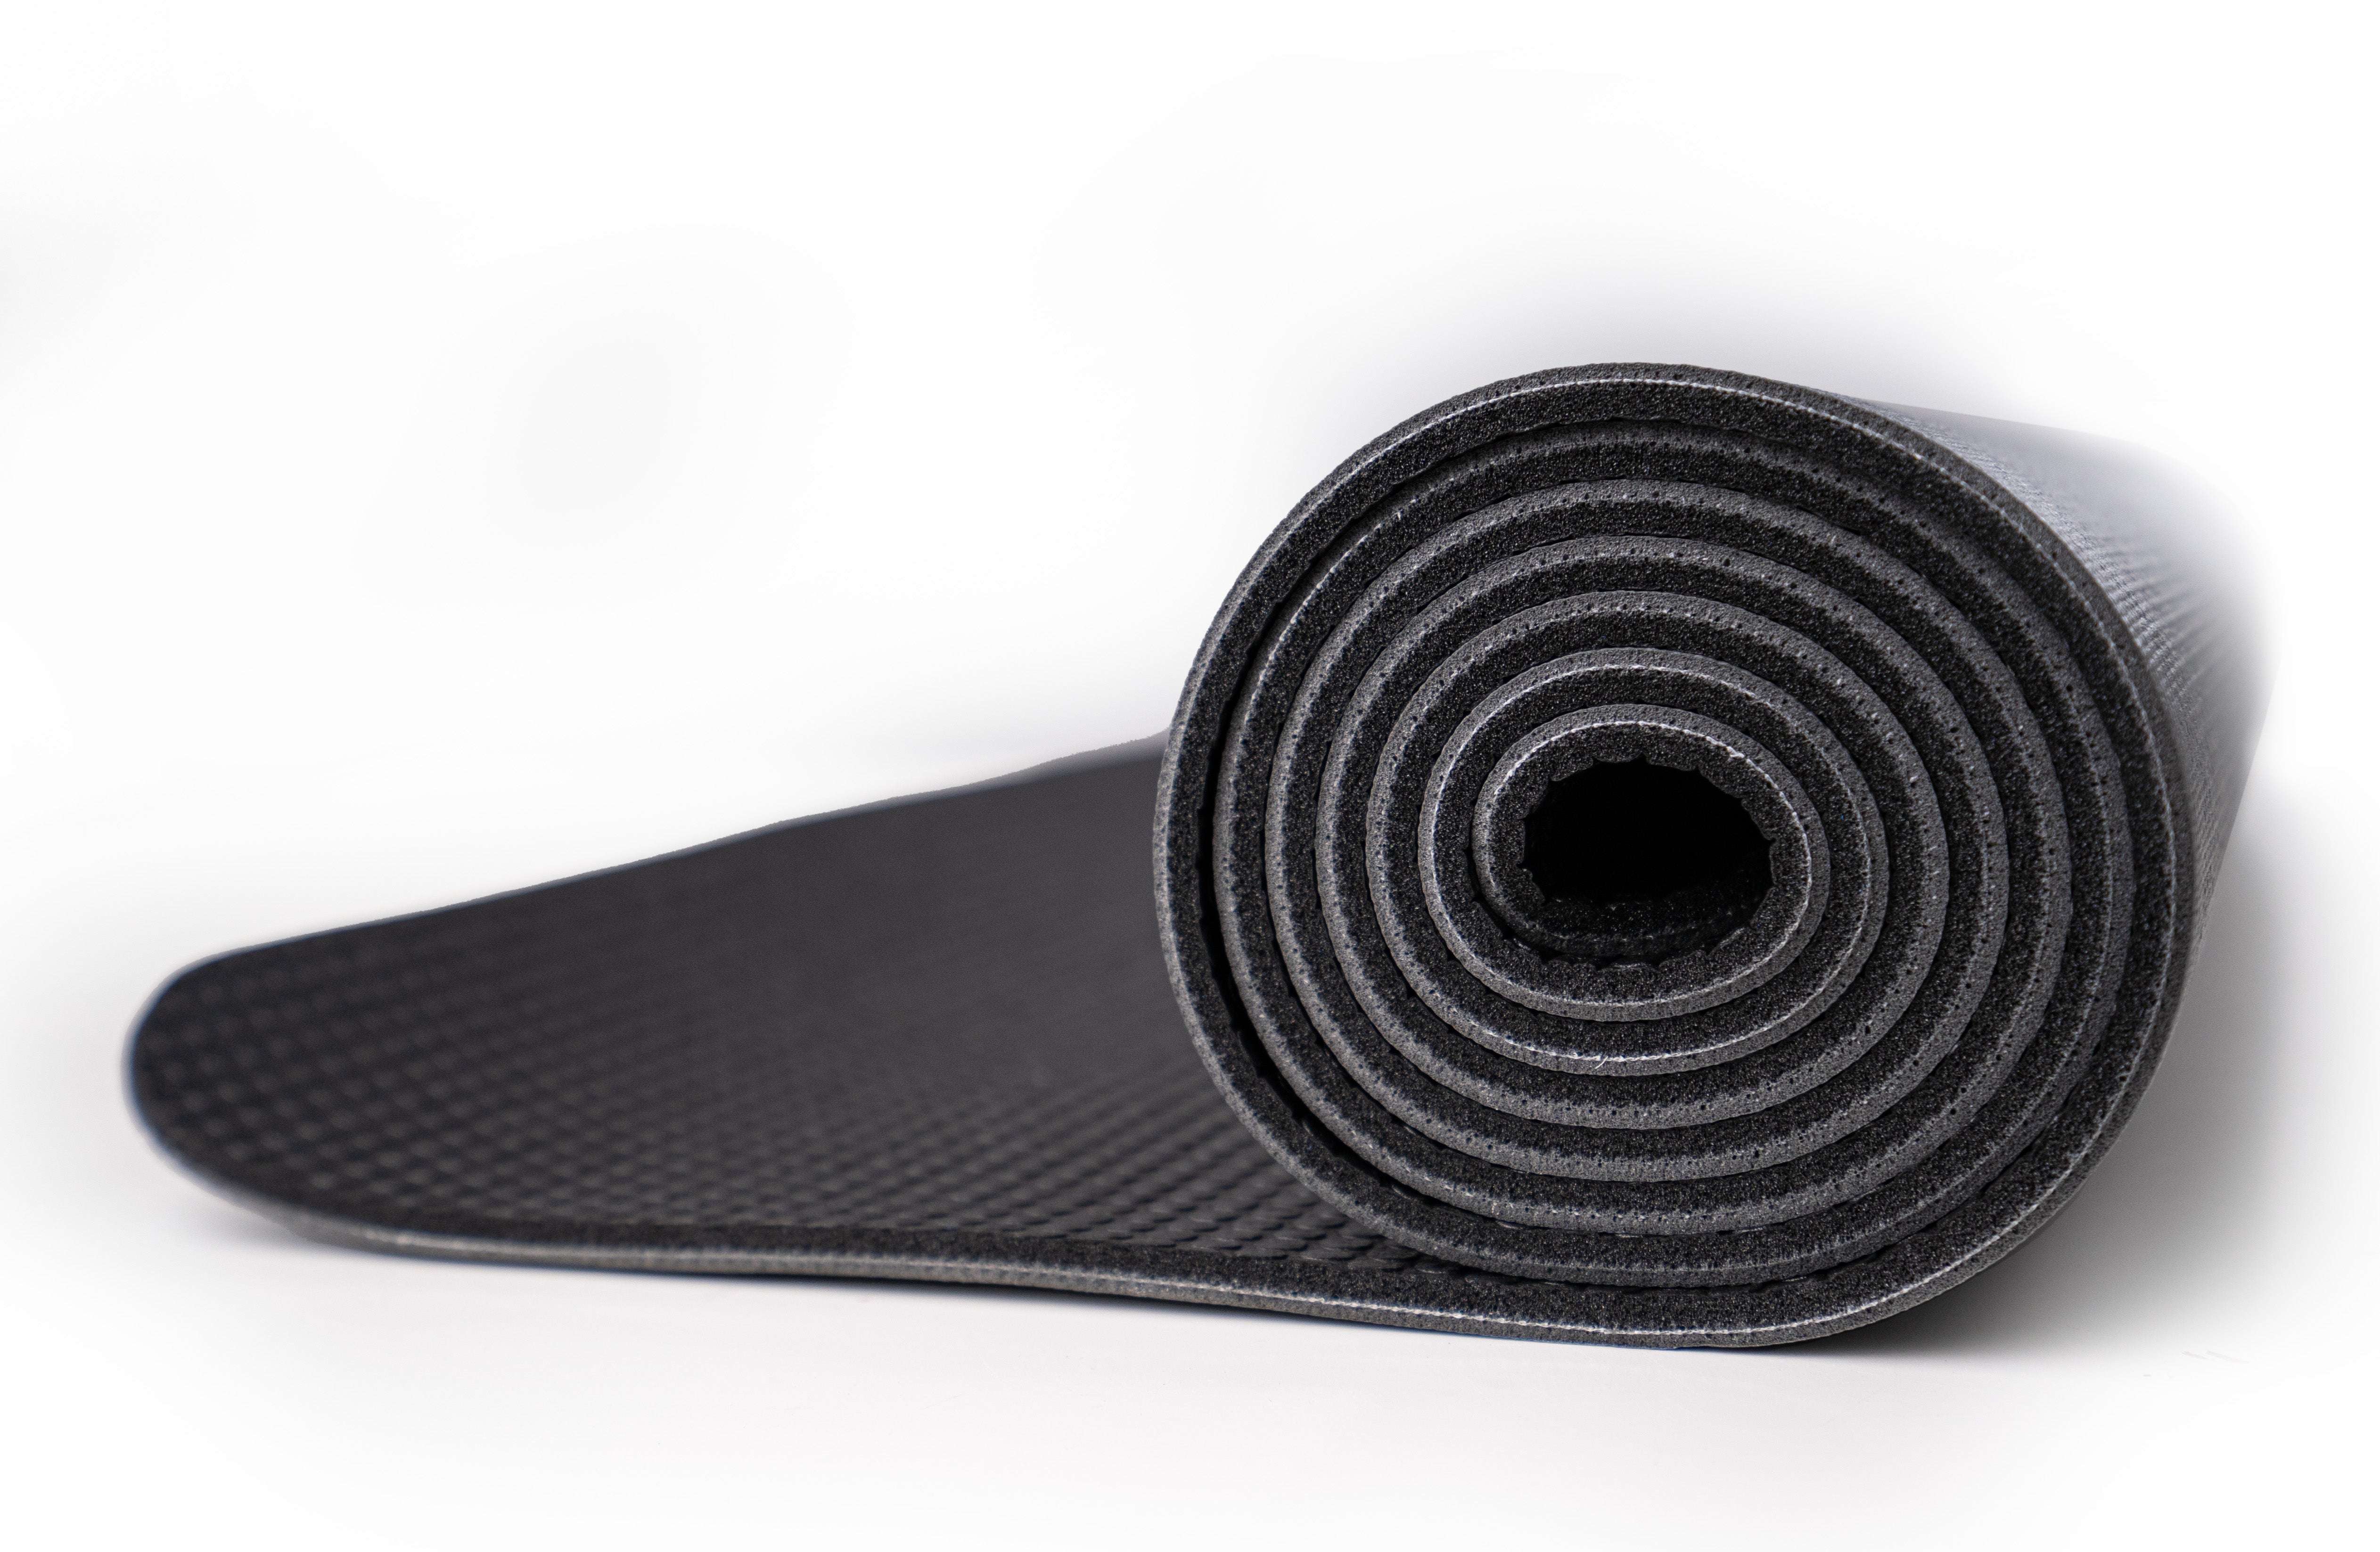 Widewing Mat: The Ultimate 36-inch Wide Yoga Mat - Moccasin